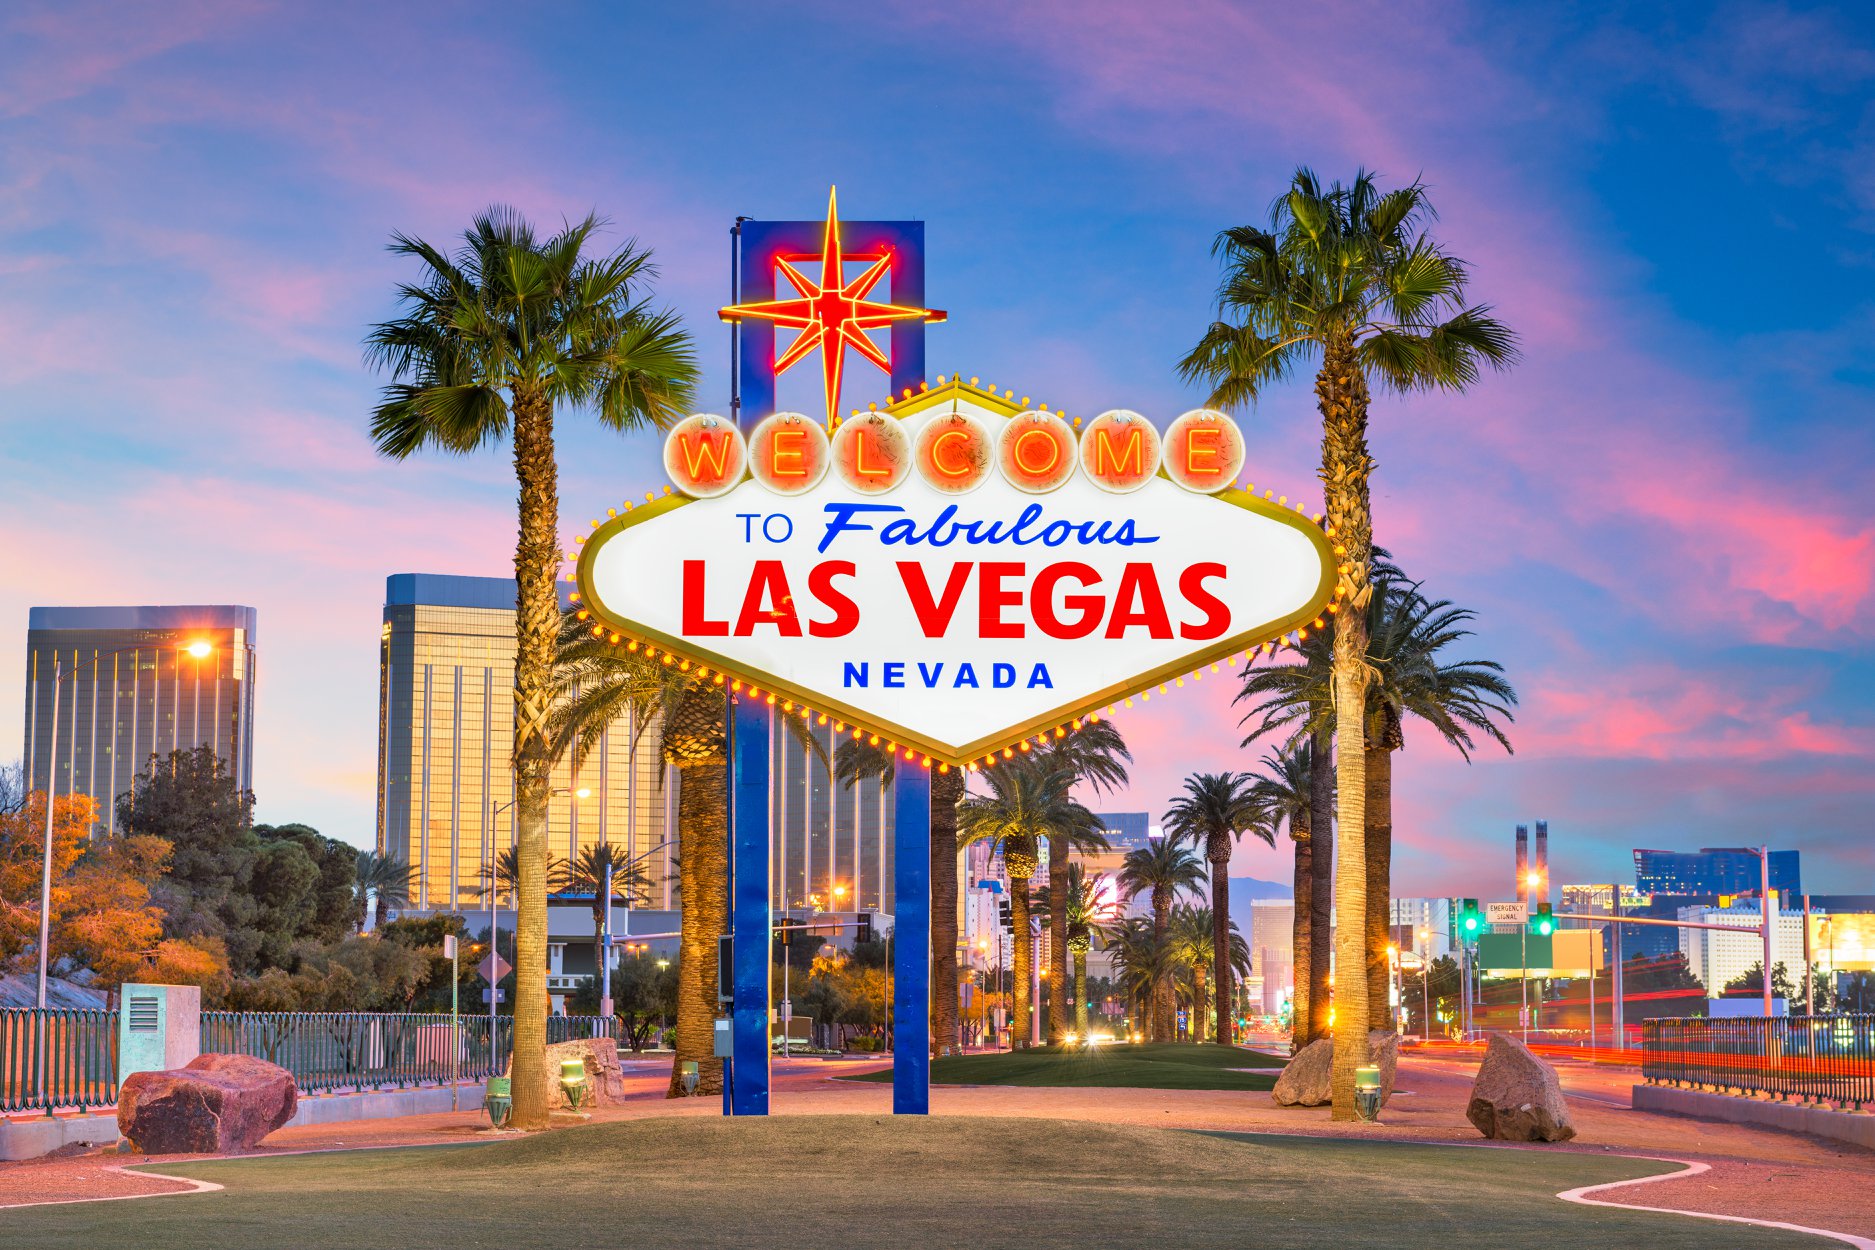 Las Vegas: Get in on the Action